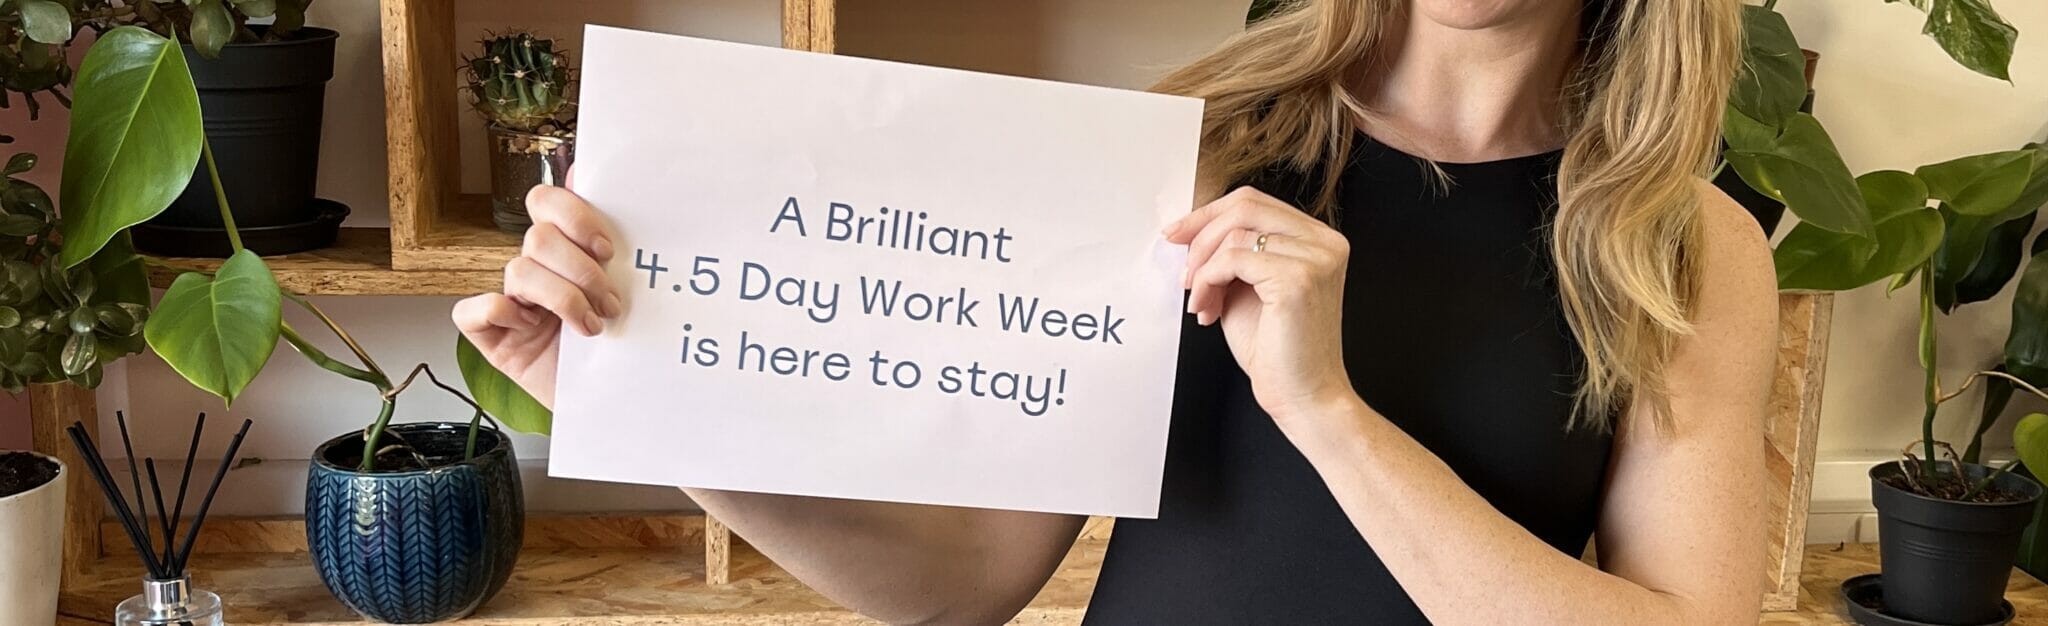 Our 4.5 Day Work Week Is Here To Stay!